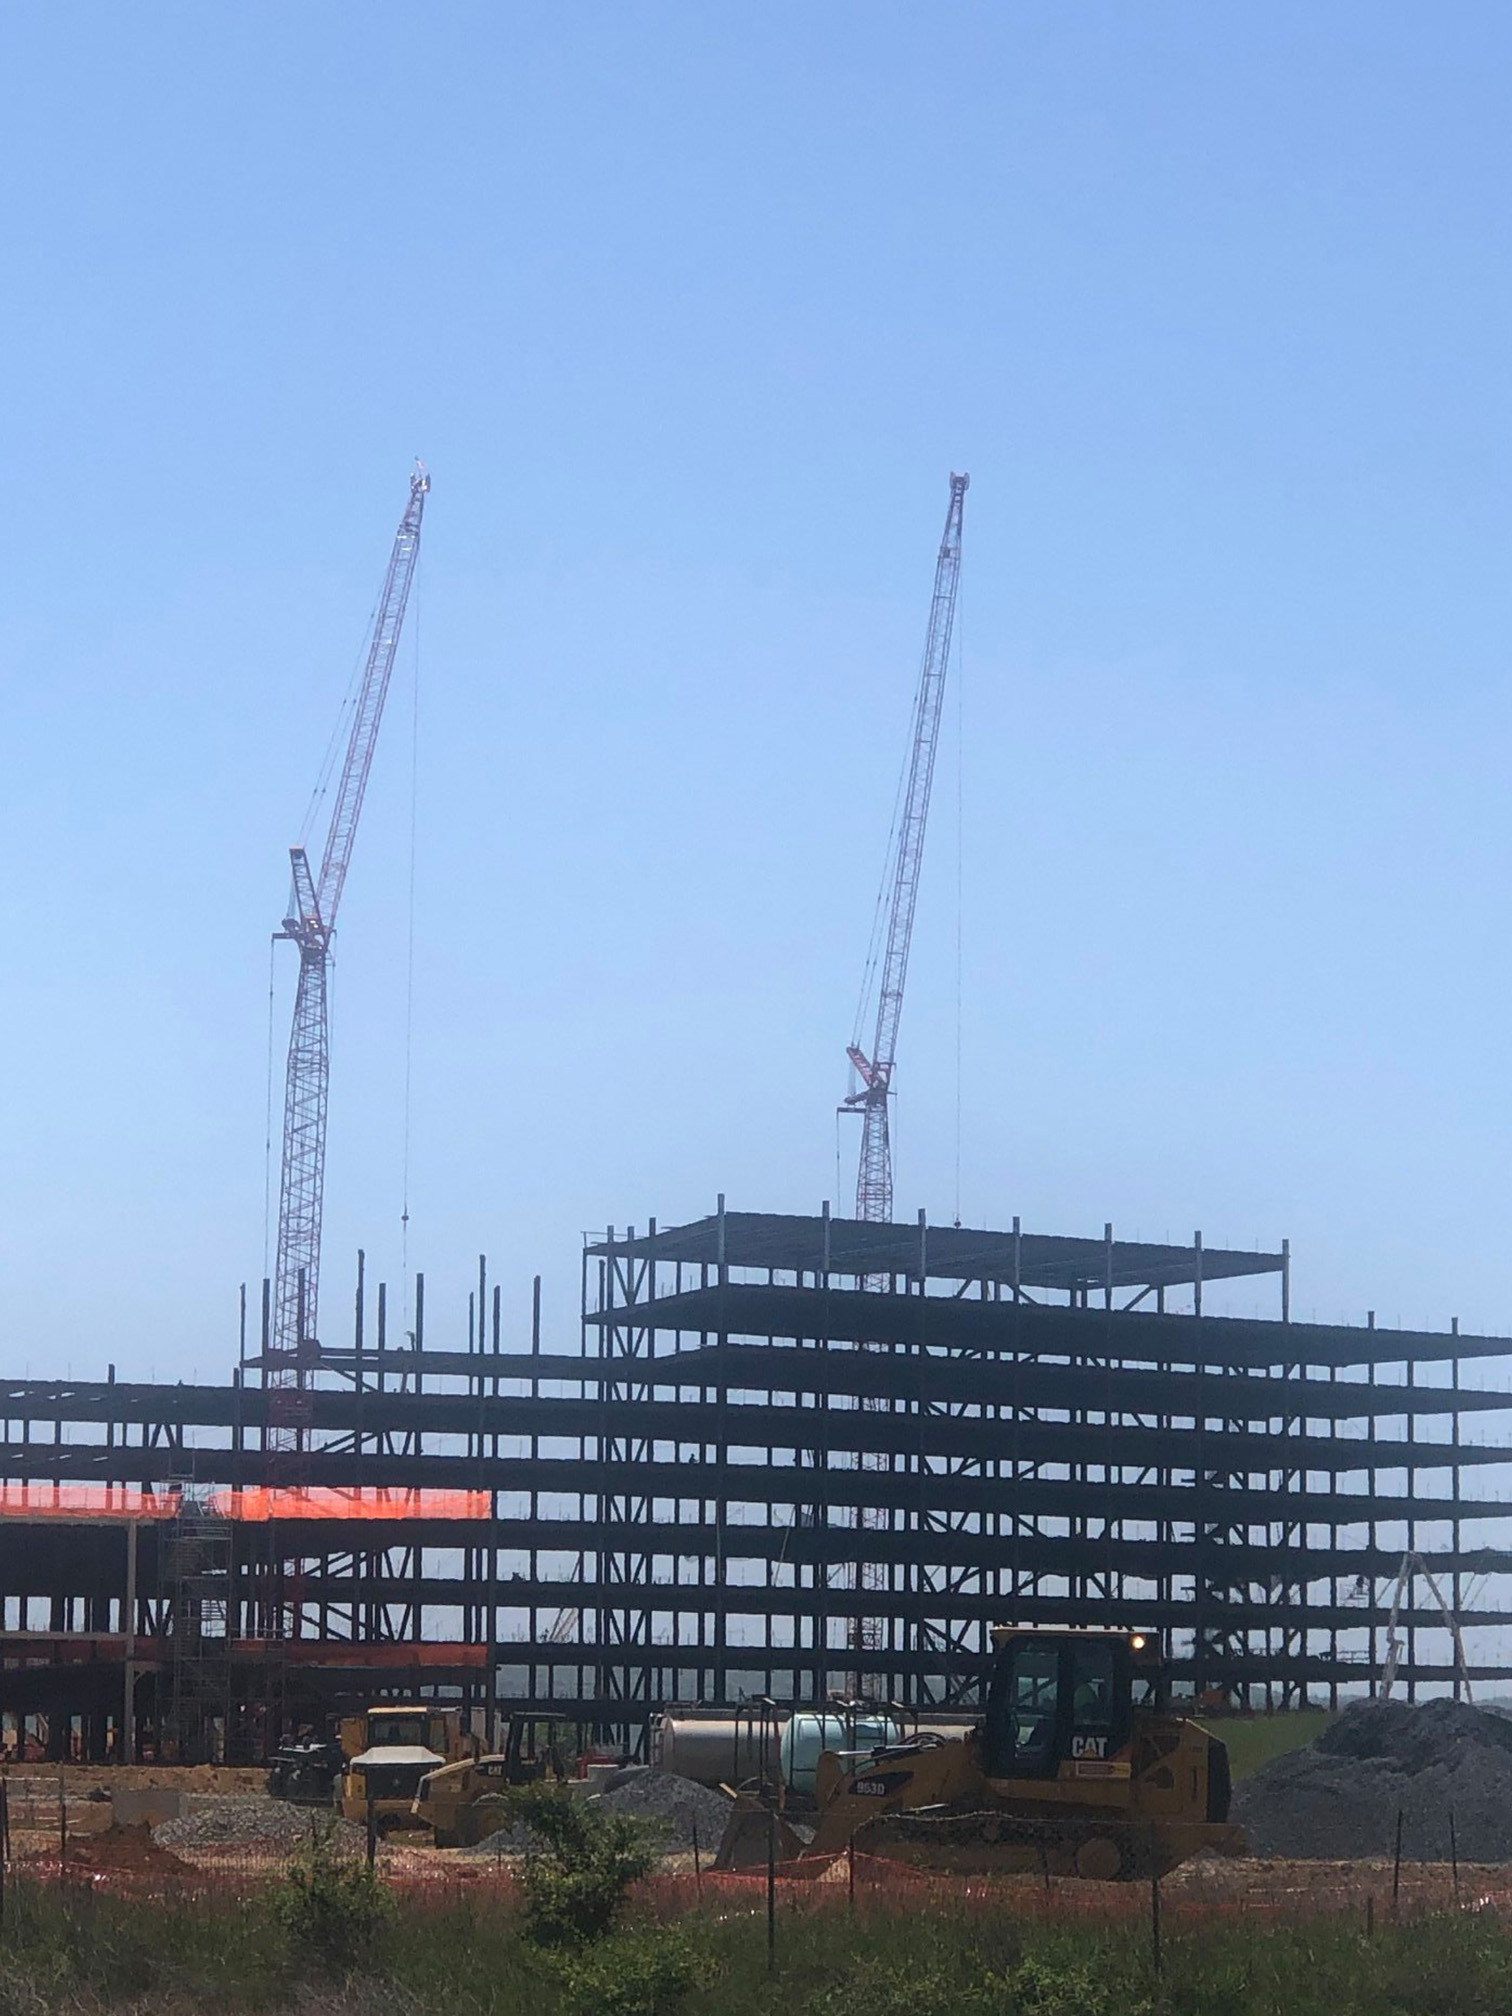 Photo of a crane at a construction site